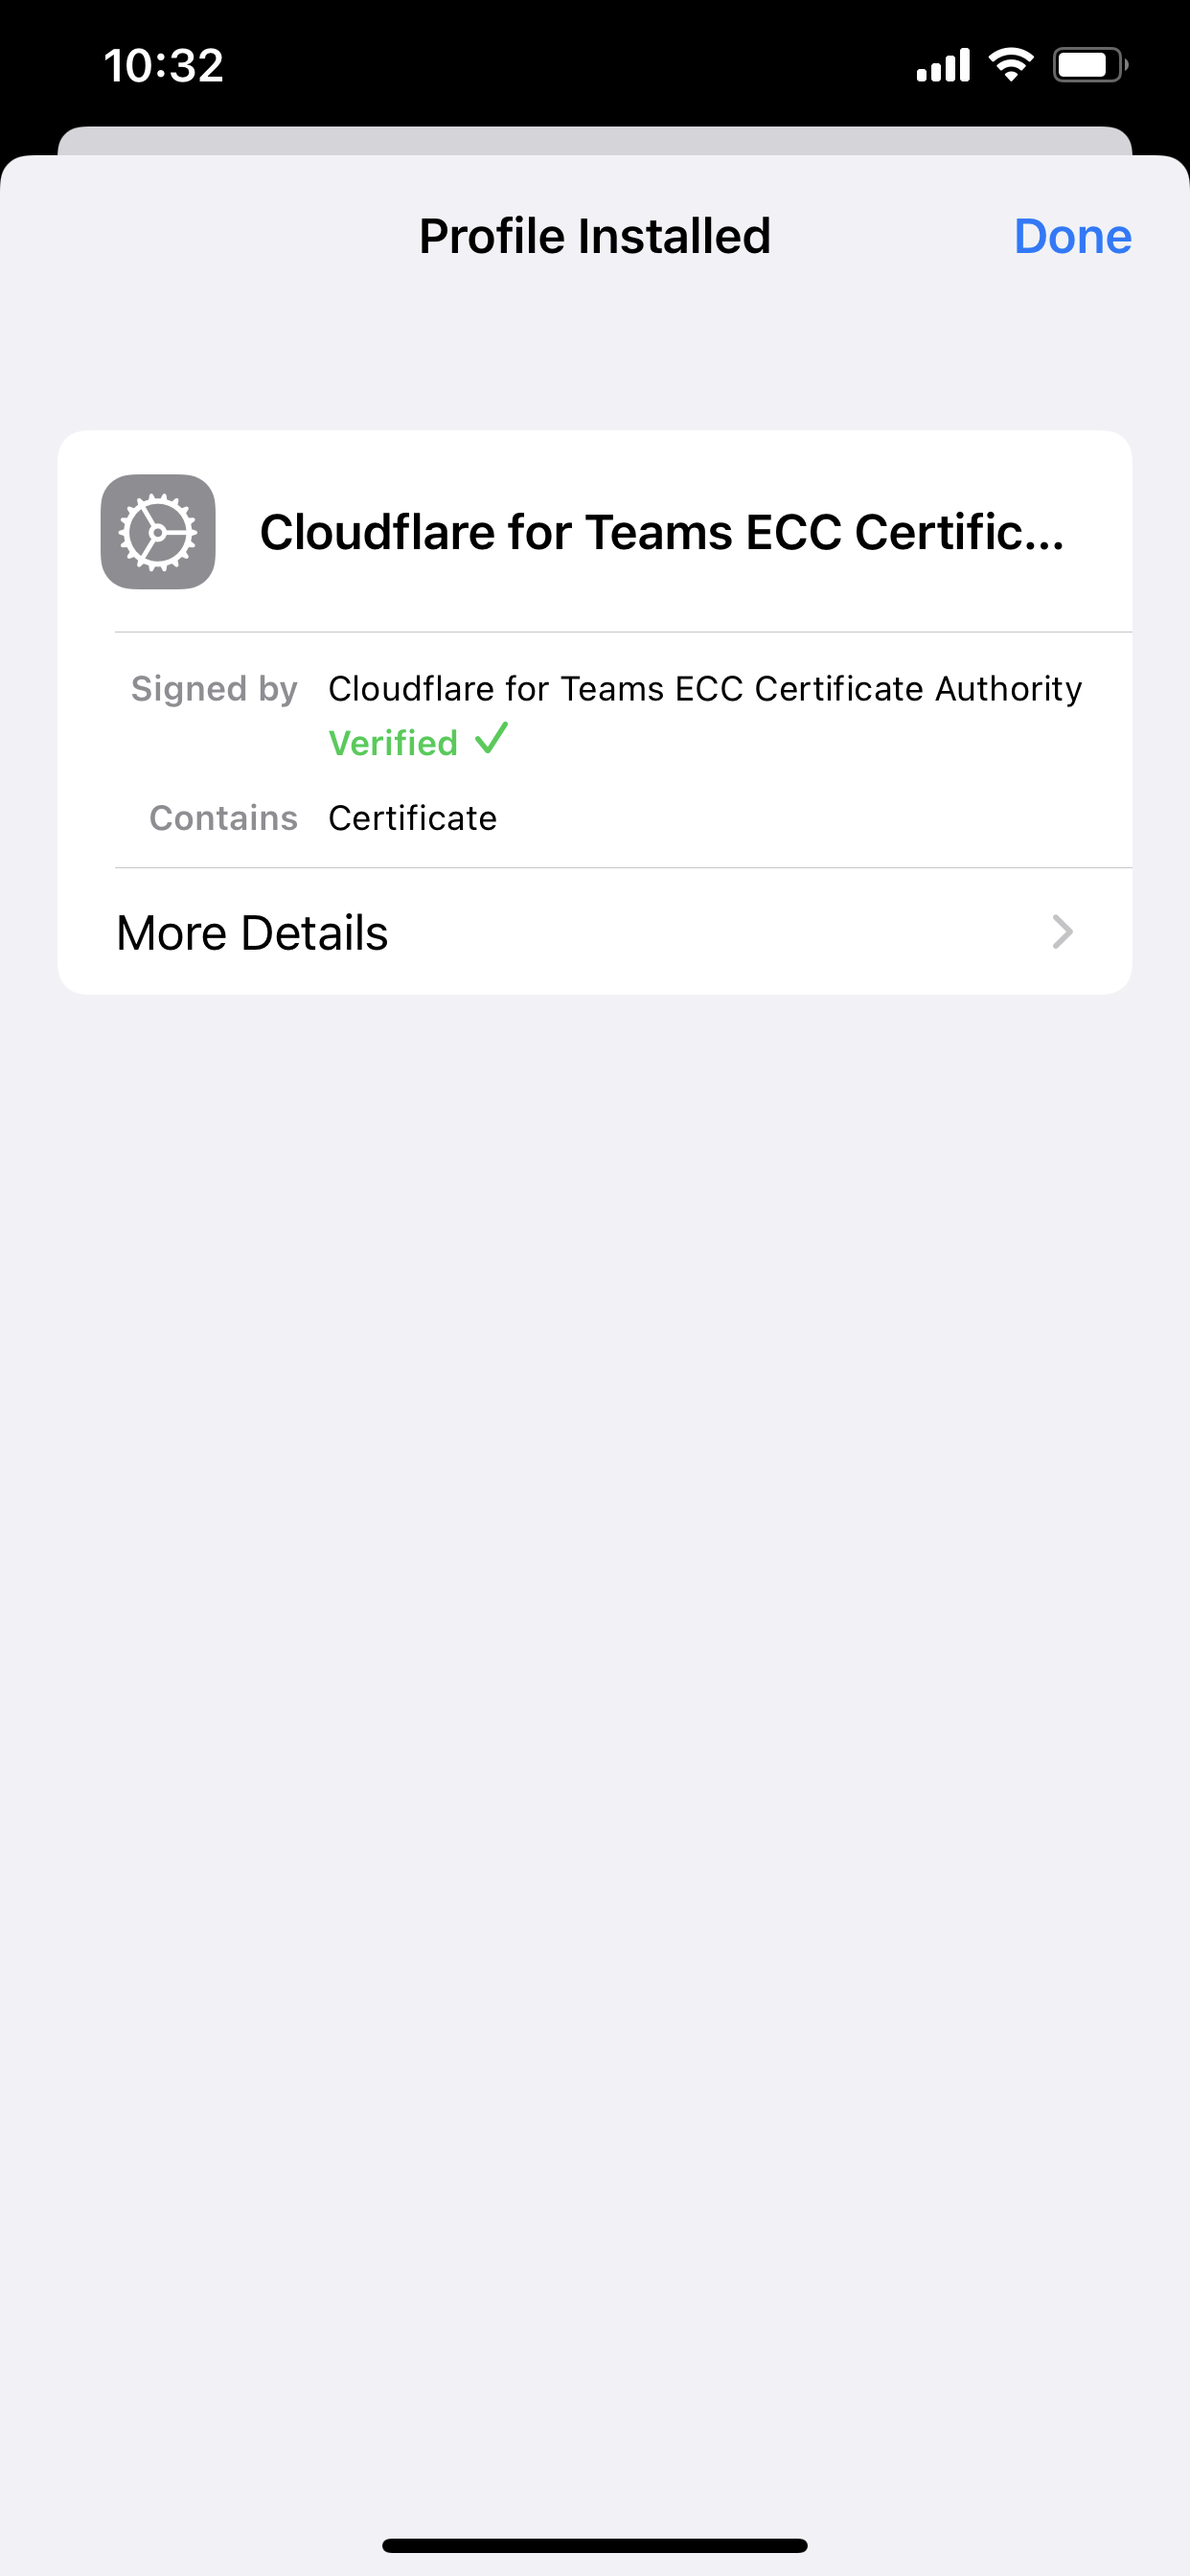 iOS message confirming certificate profile installation